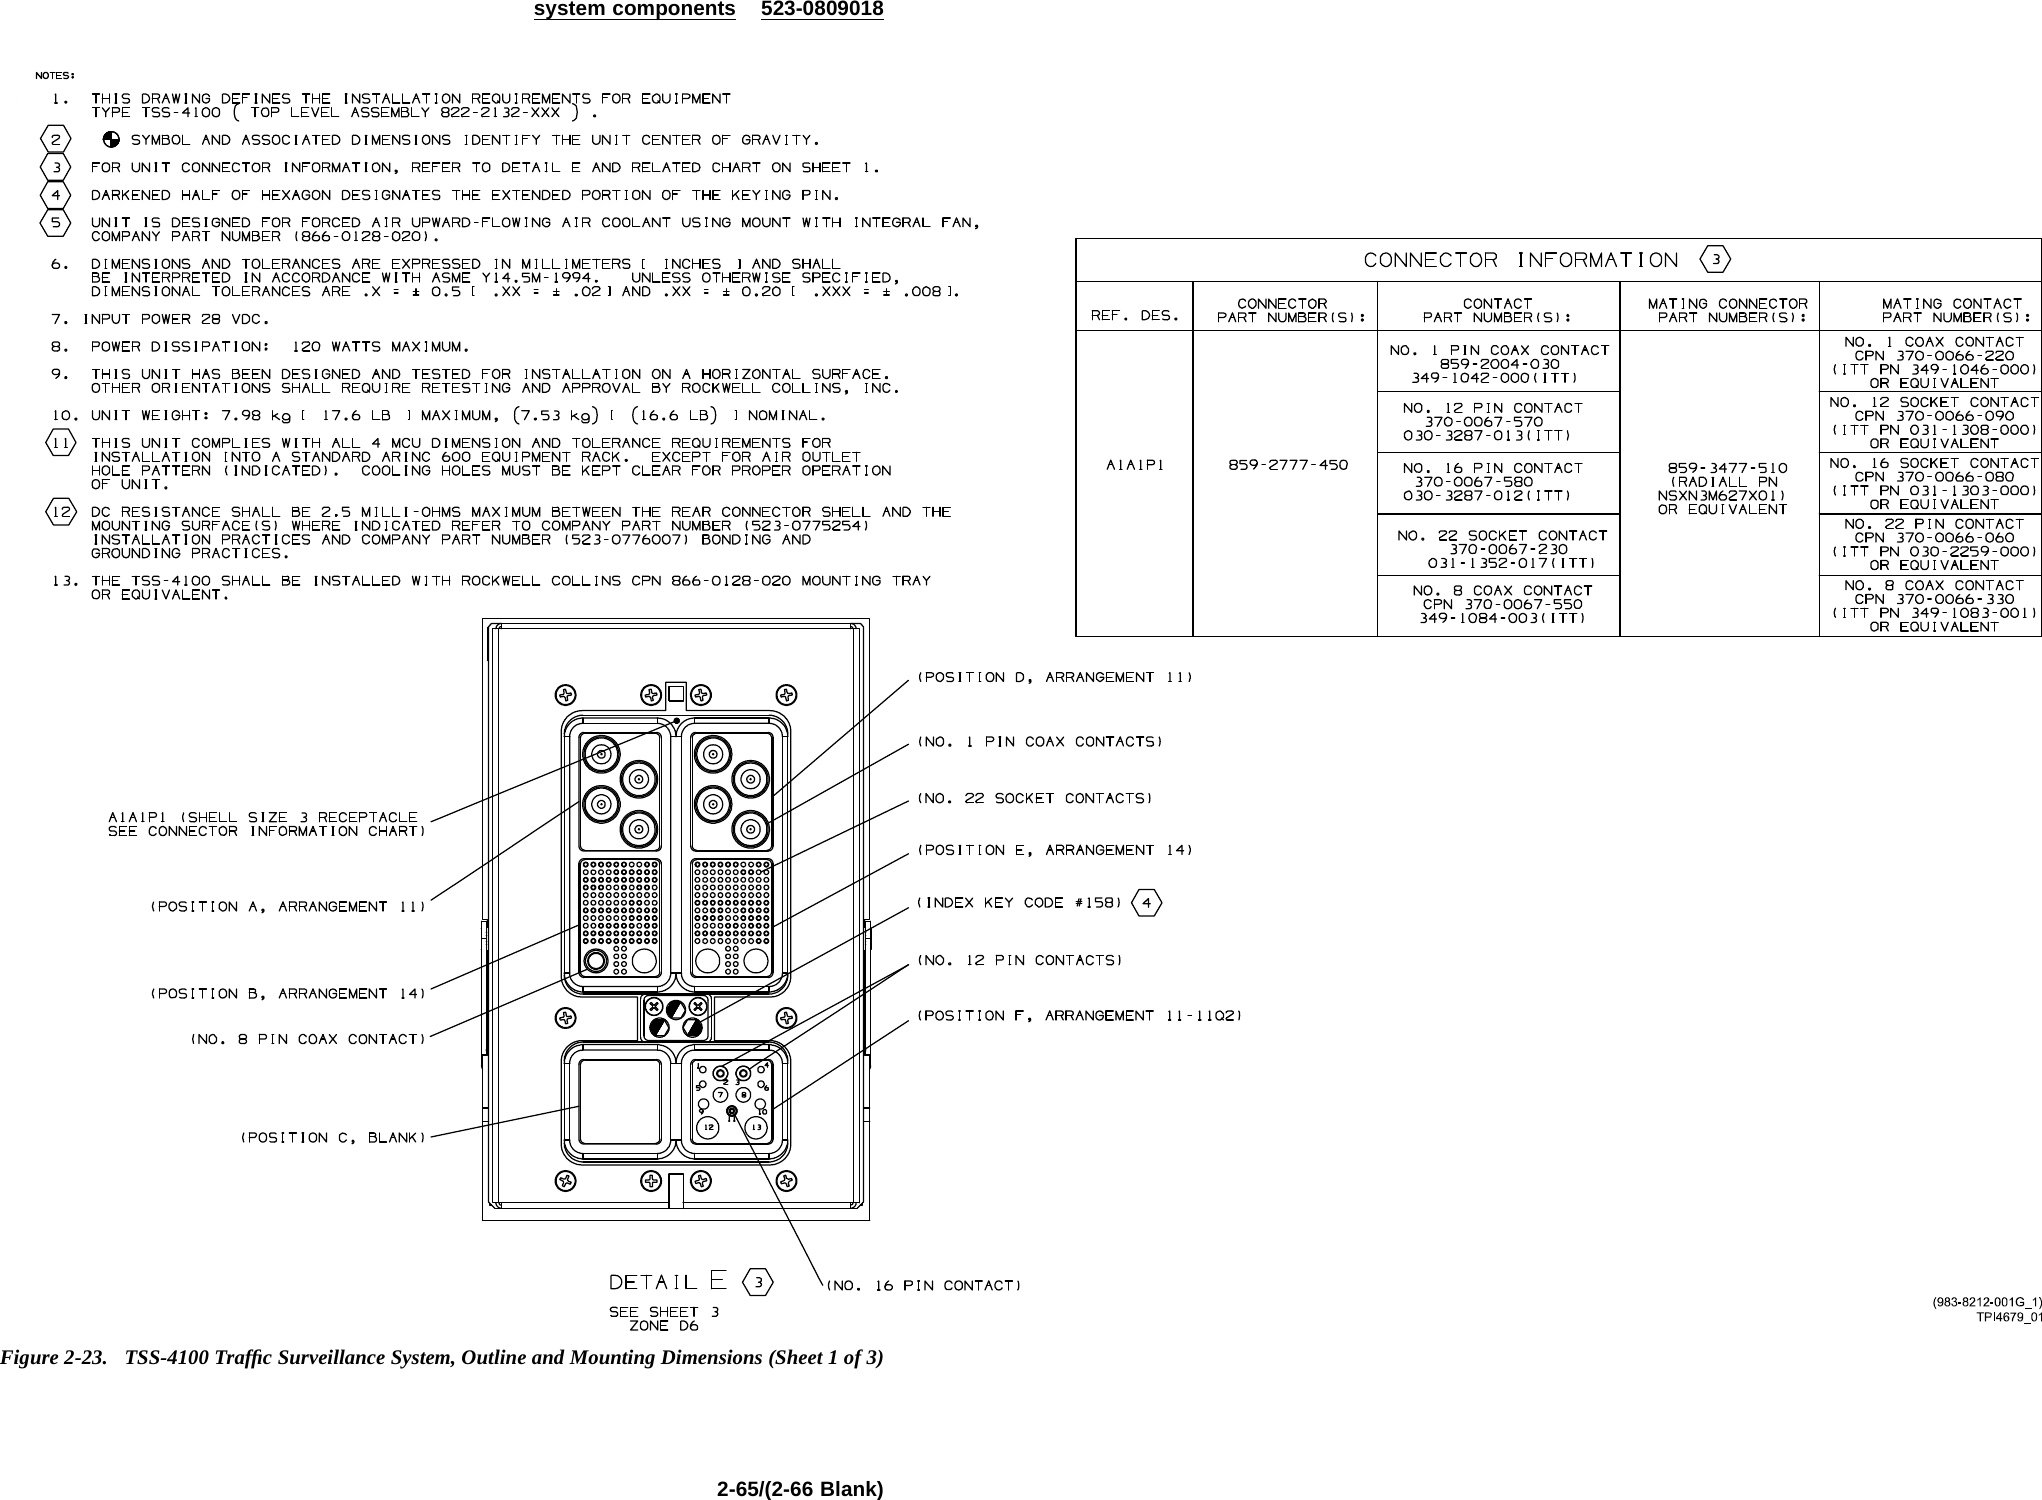 system components 523-0809018Figure 2-23. TSS-4100 Trafﬁc Surveillance System, Outline and Mounting Dimensions (Sheet 1 of 3)2-65/(2-66 Blank)